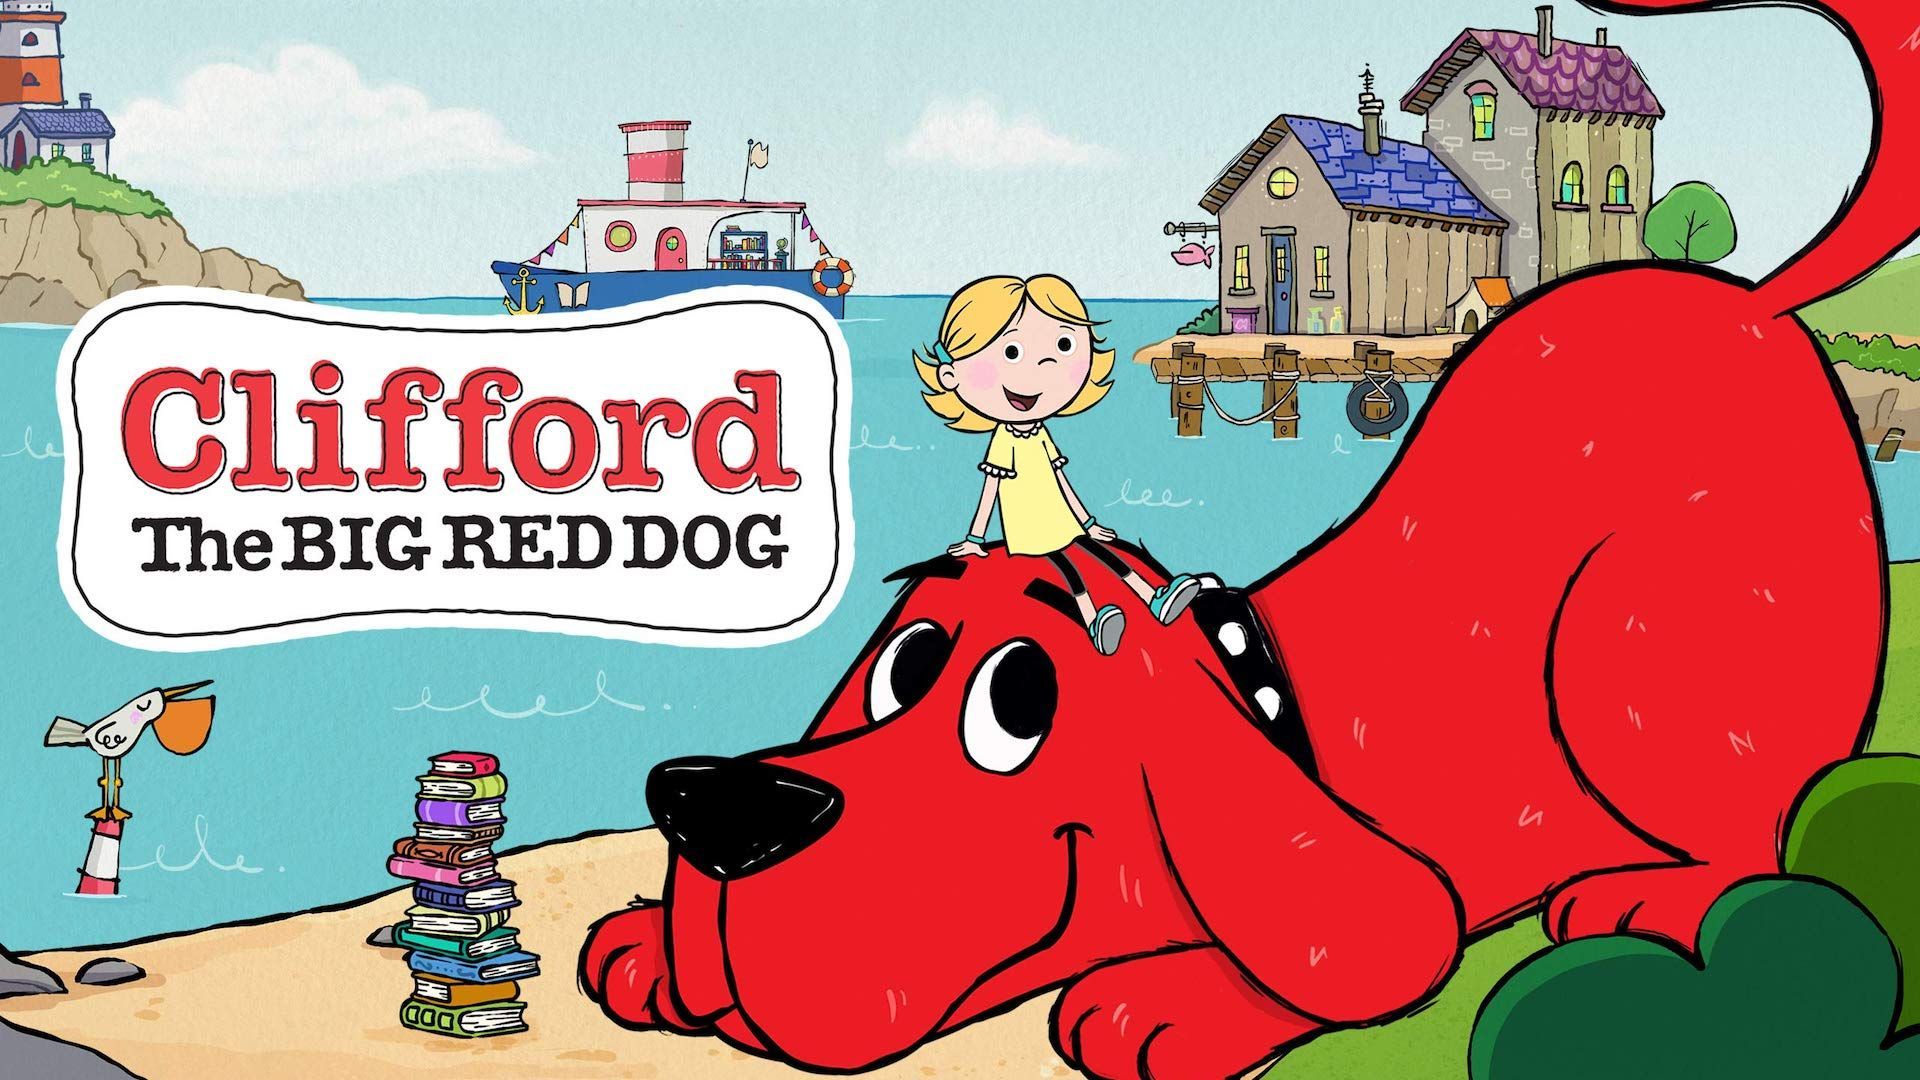 Clifford the Big Red Dog Episodes on Prime Video or